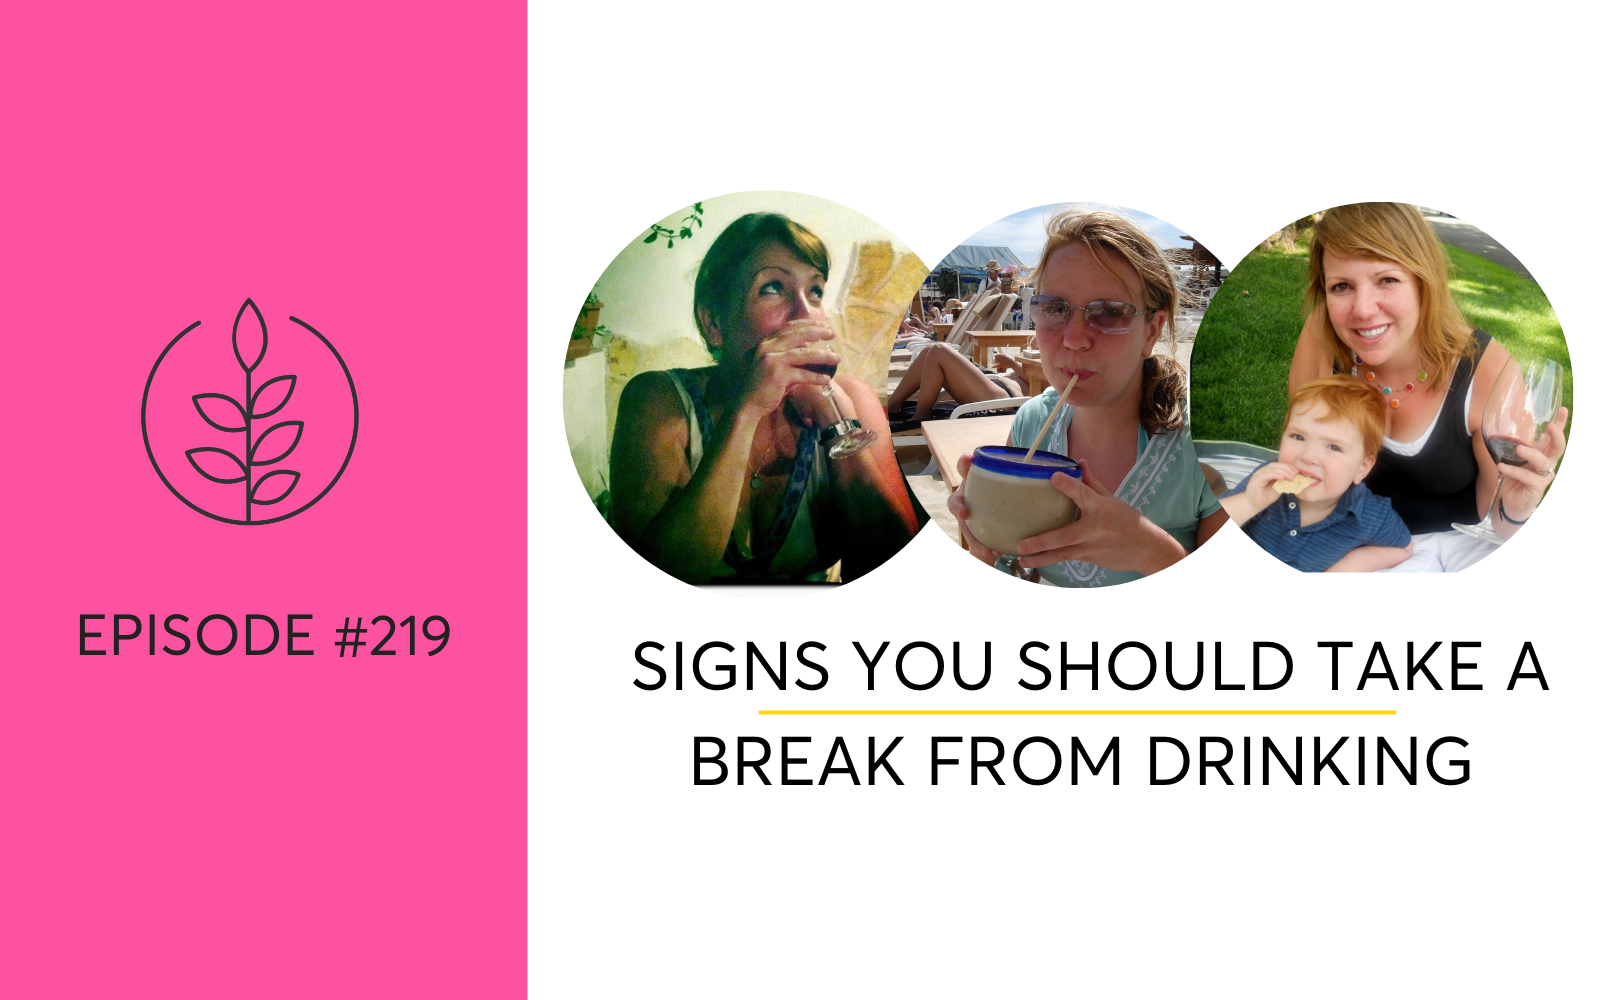 Should I Take A Break From Drinking? Look For These Signs To Know It’s Time